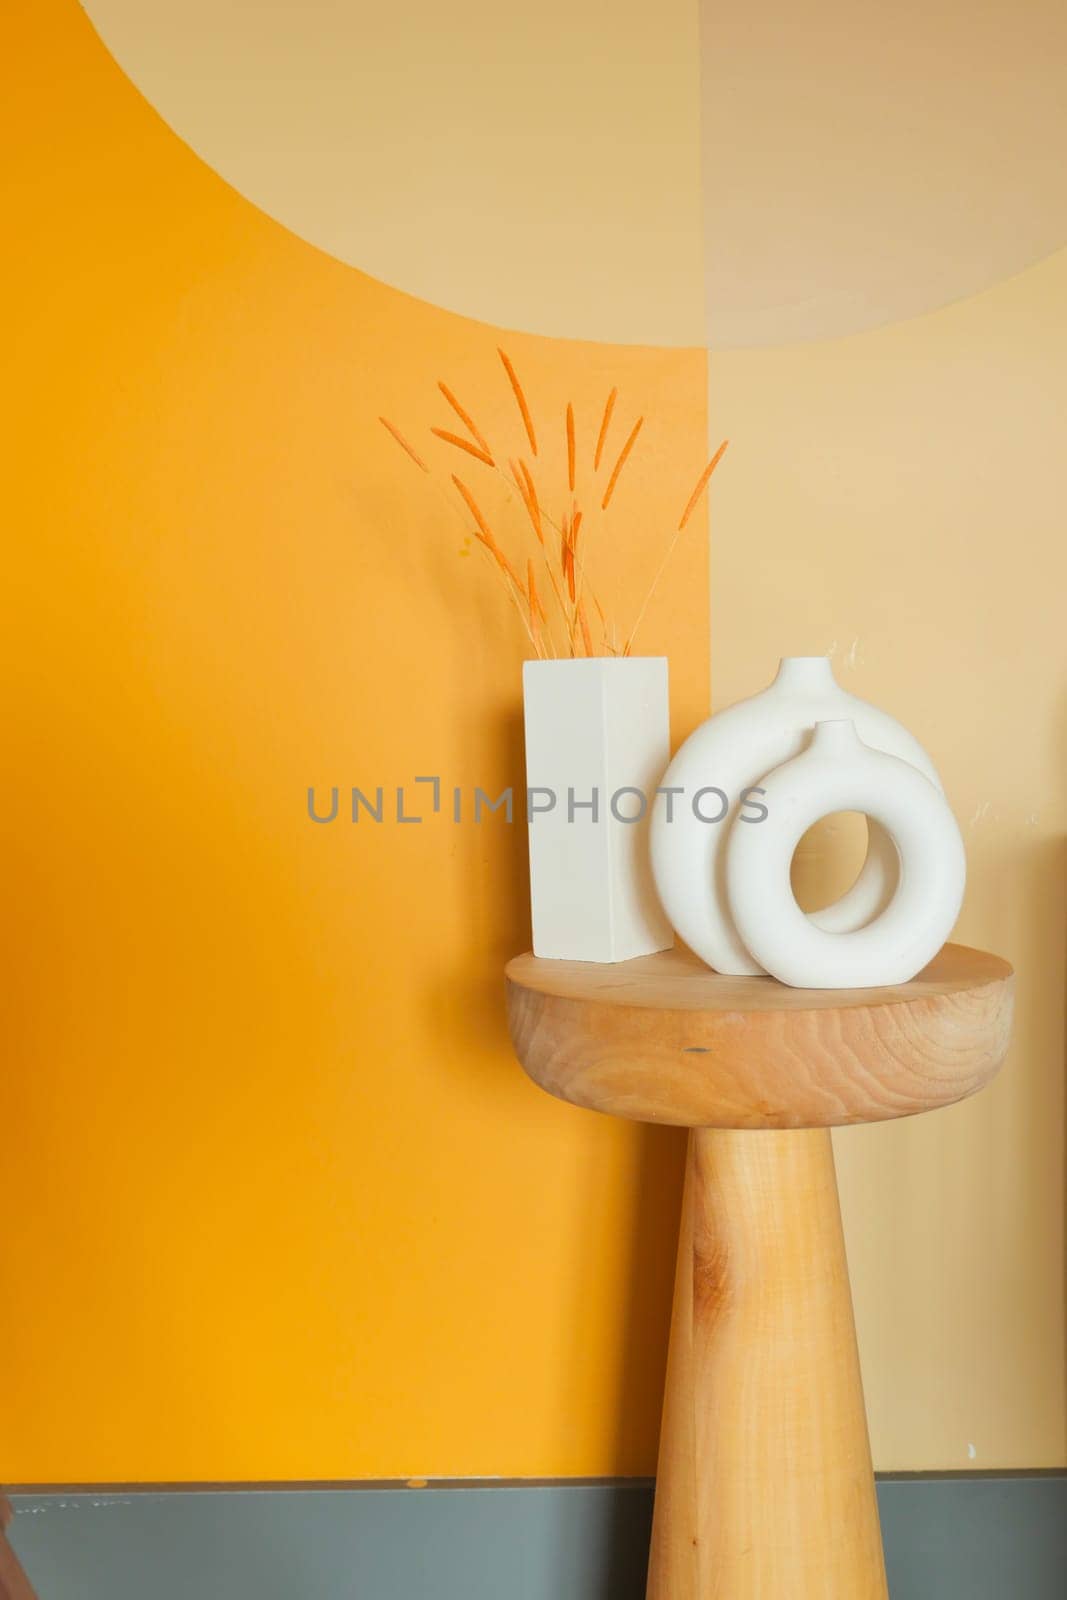 Wooden table with vase and sculpture on it, against yellow wall in room by towfiq007